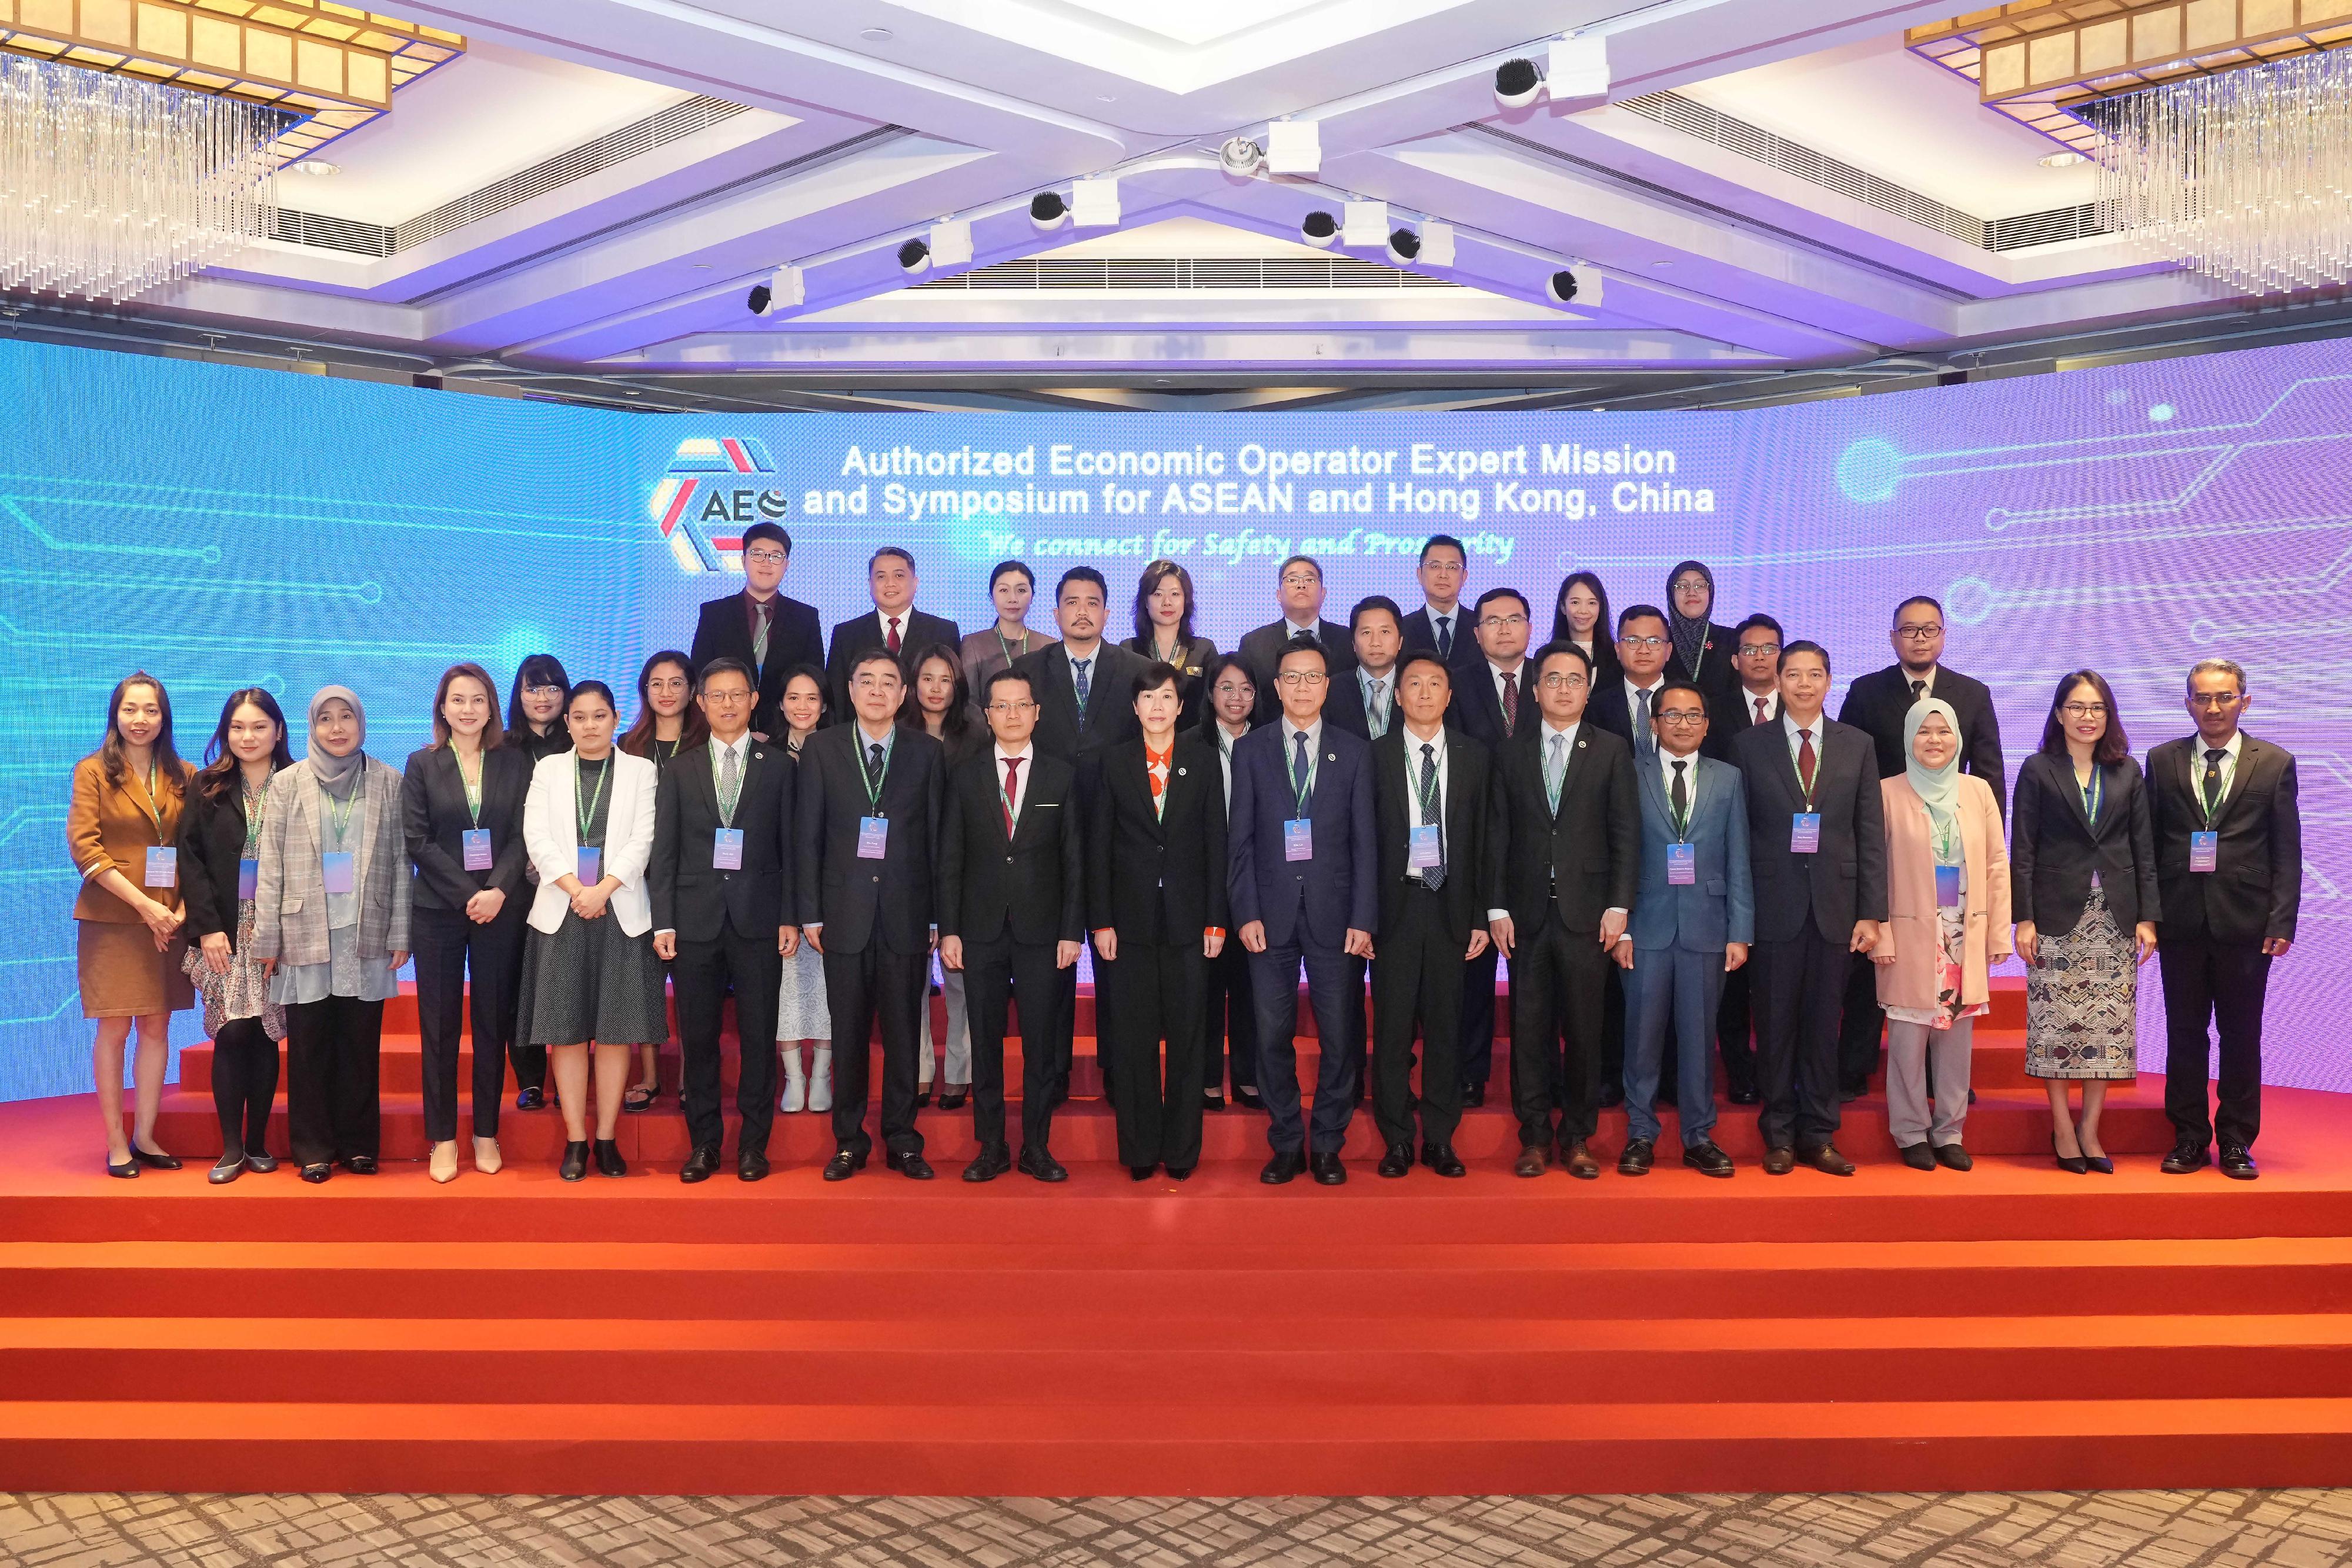 The Customs and Excise Department of Hong Kong (C&ED) today (November 29) and tomorrow (November 30) is holding the AEO Expert Mission and Symposium for ASEAN and Hong Kong, China. Photo shows the Commissioner of Customs and Excise, Ms Louise Ho (first row, centre), with officers from the Customs administrations of the ASEAN (Association of Southeast Asian Nations) Member States, the General Administration of Customs of the People's Republic of China, Macao Customs Service and the C&ED.